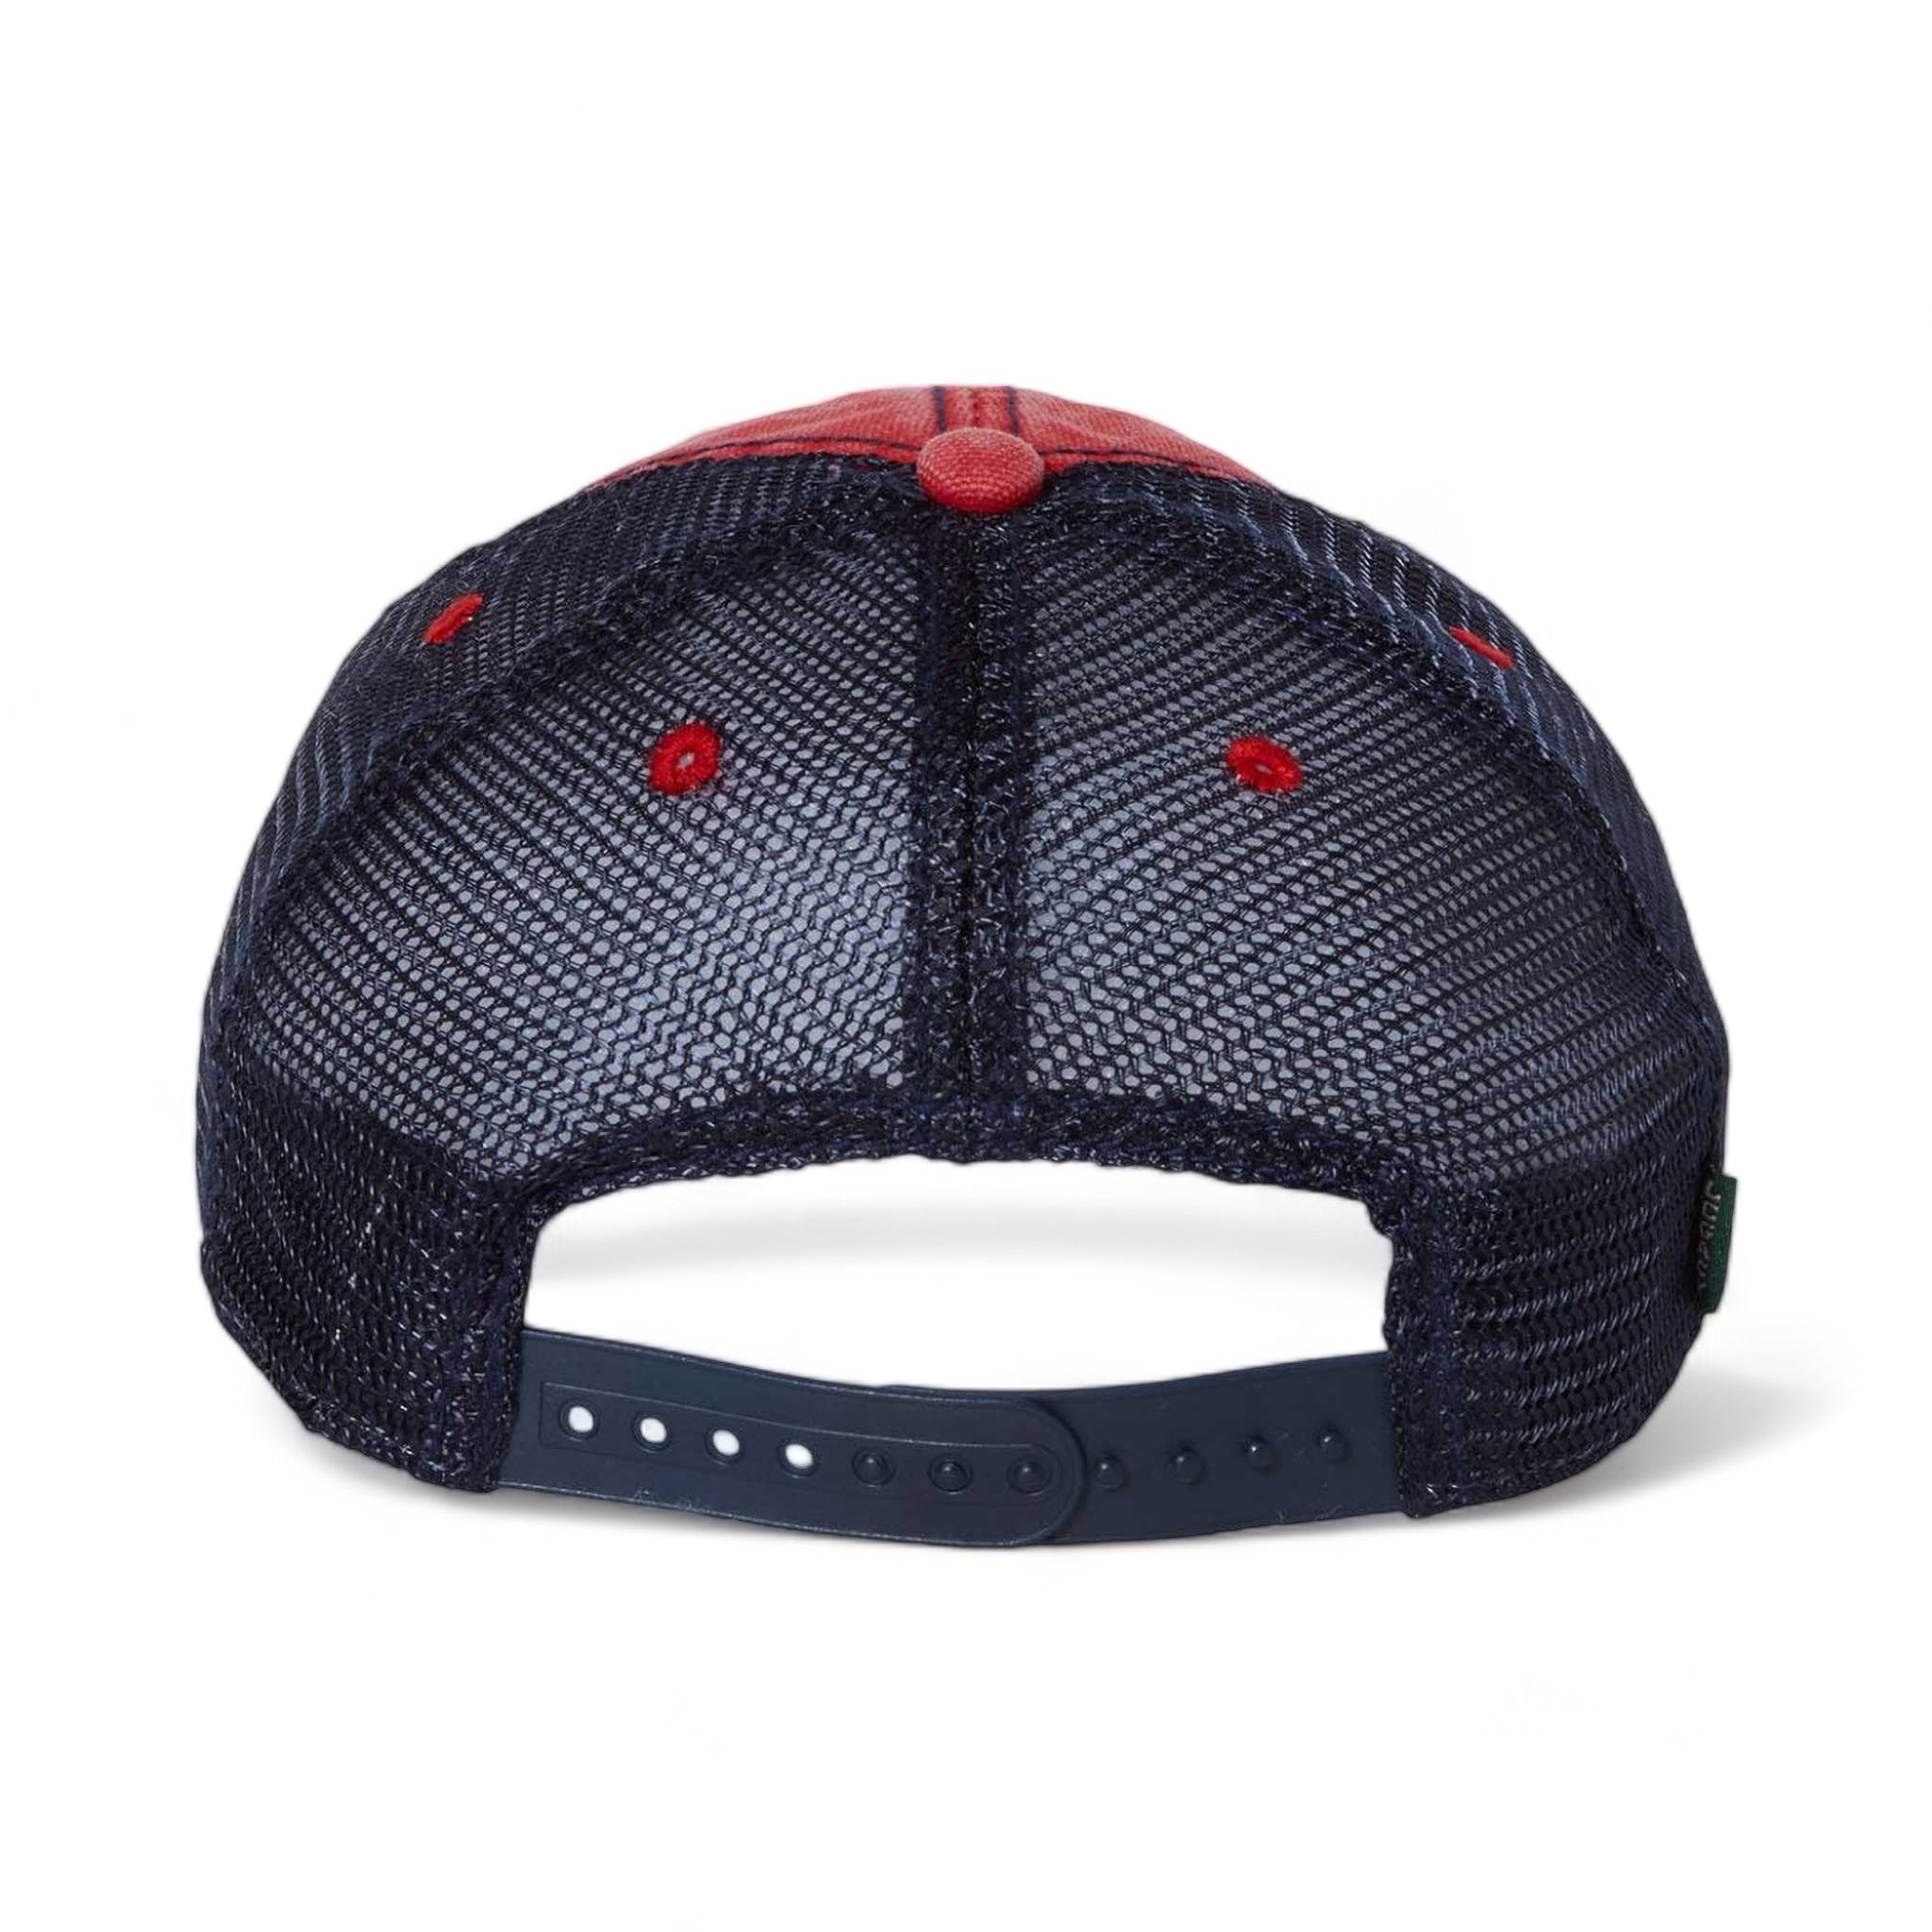 Back view of LEGACY DTA custom hat in scarlet red and navy